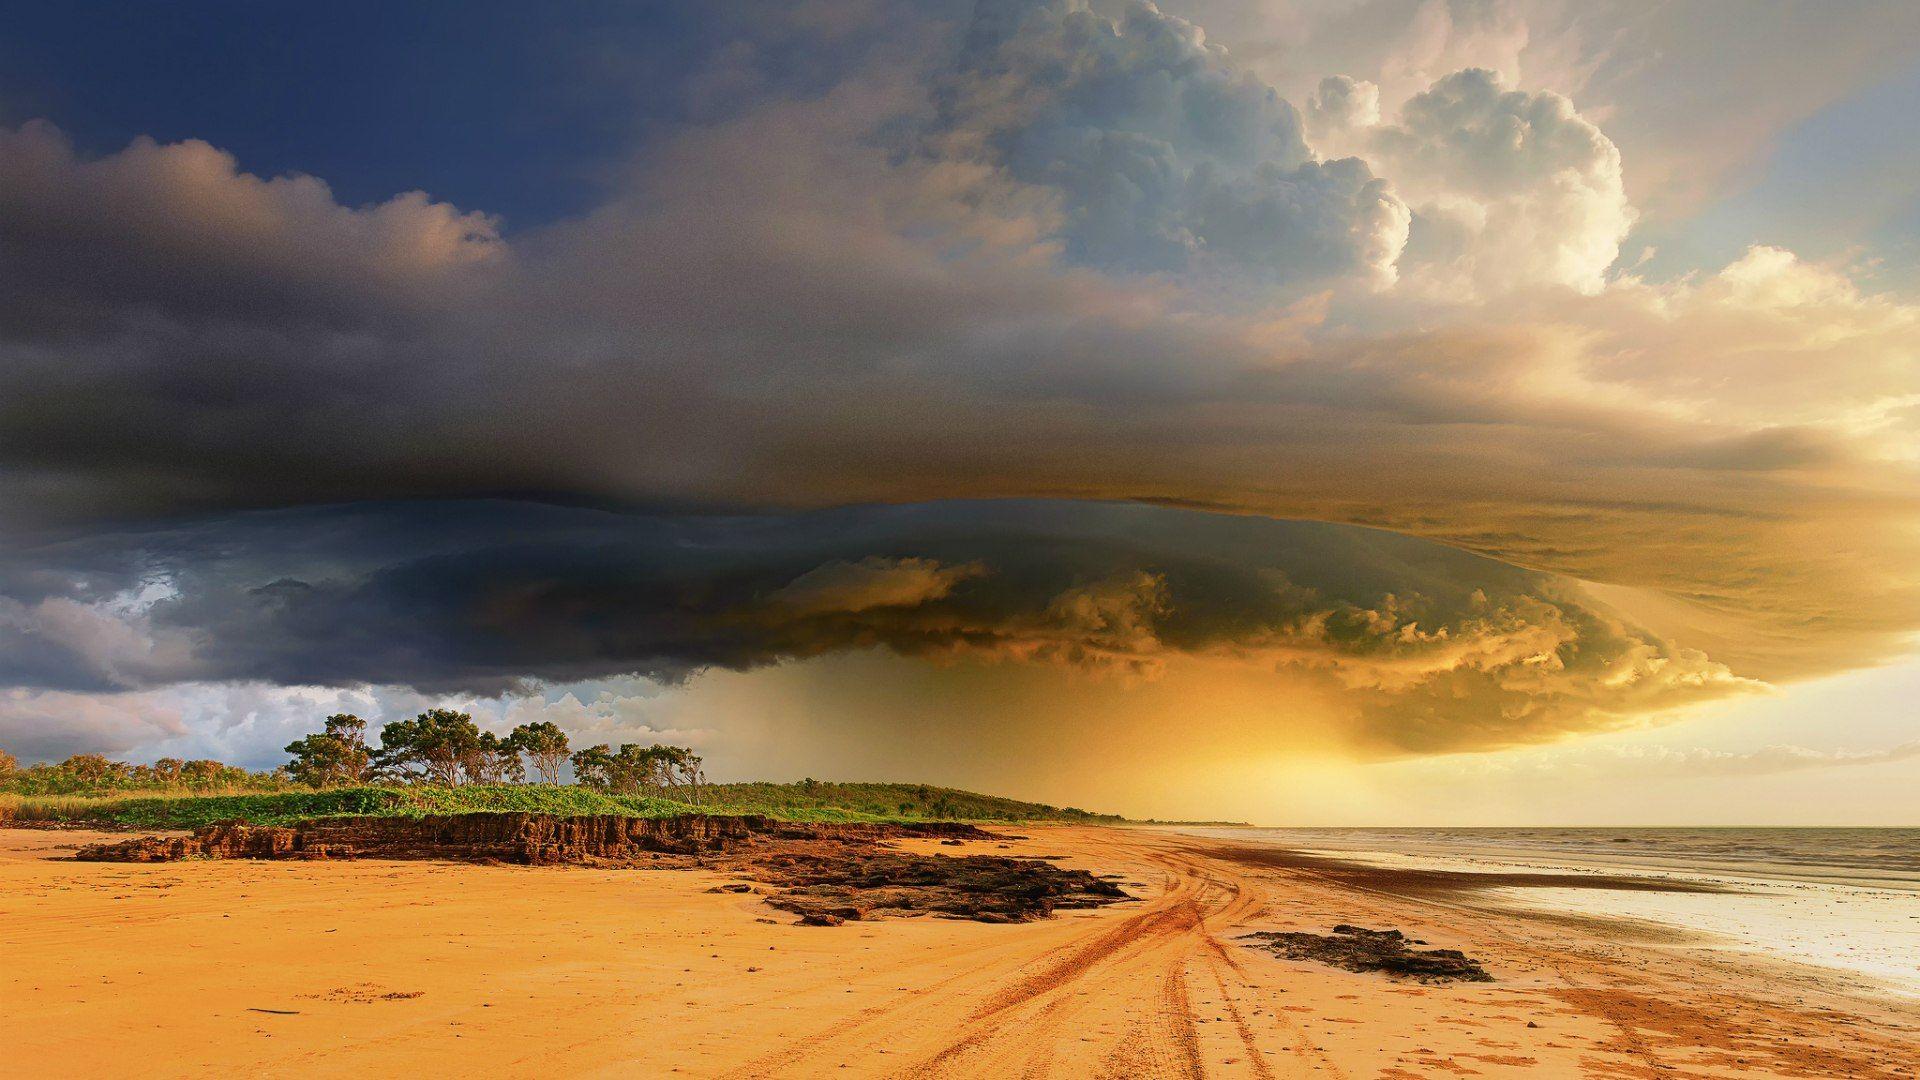 Tropical storm in Australia wallpaper and image